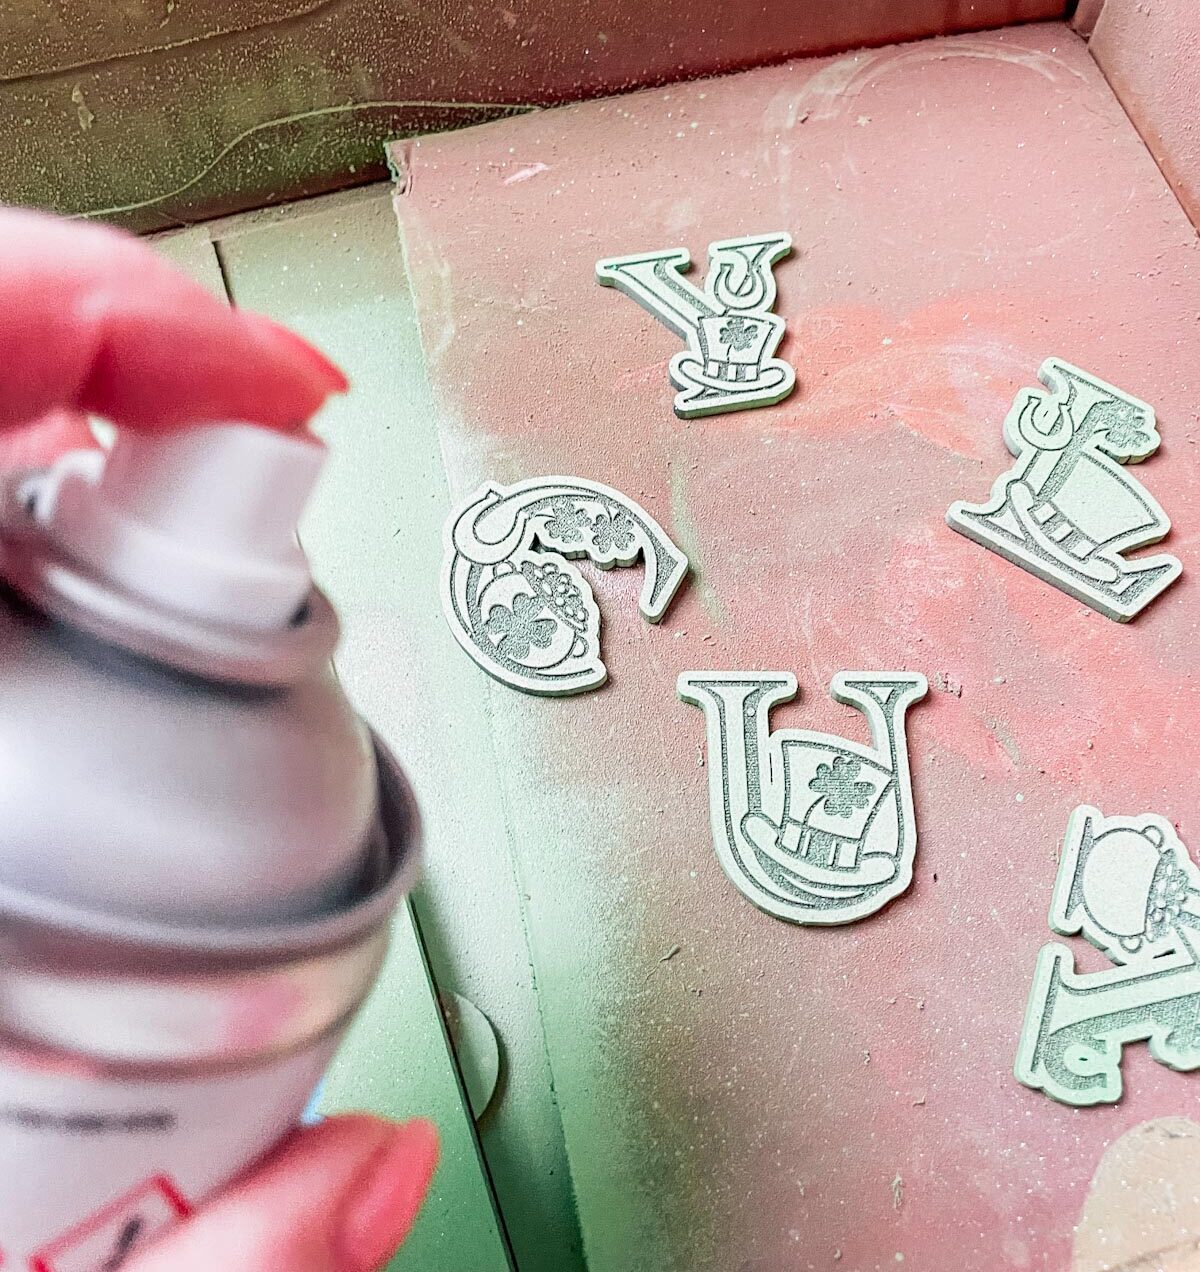 Spray paint the letters, i used more cream on the letters so they were slighly different the the jigsaw surround